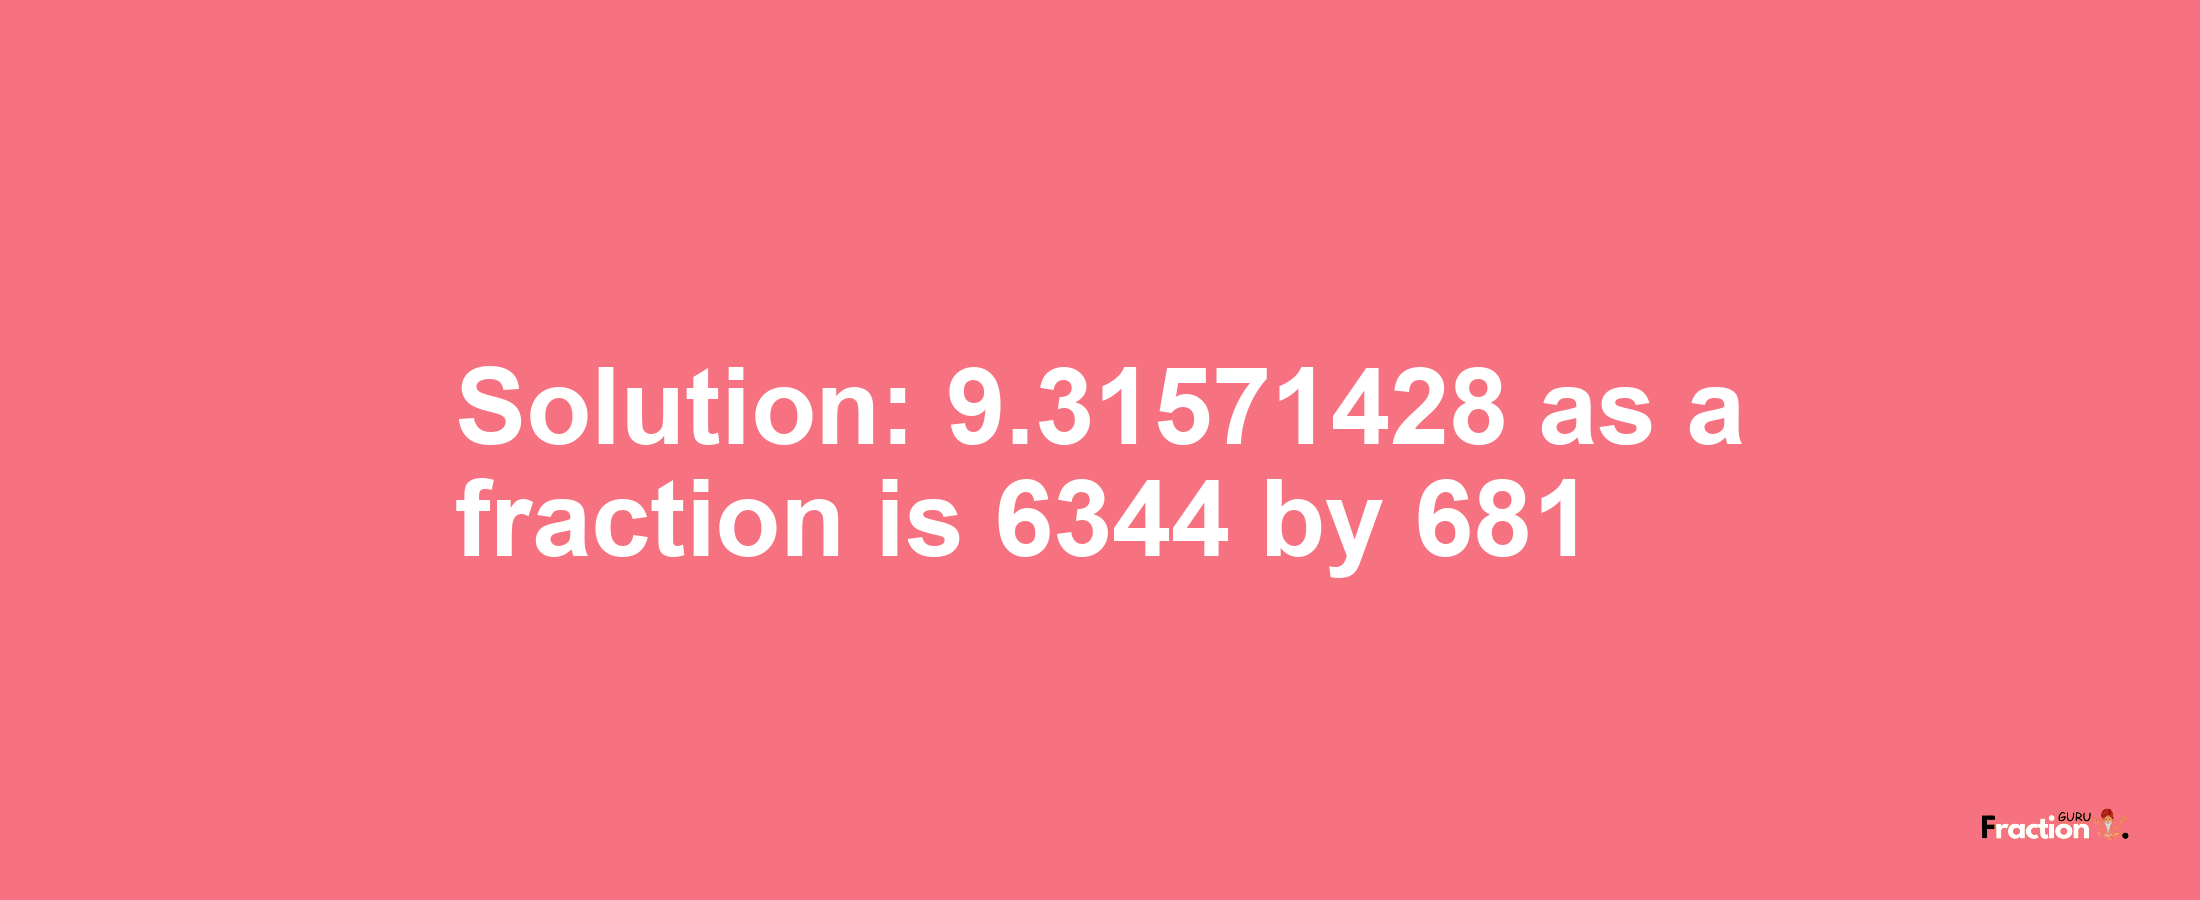 Solution:9.31571428 as a fraction is 6344/681